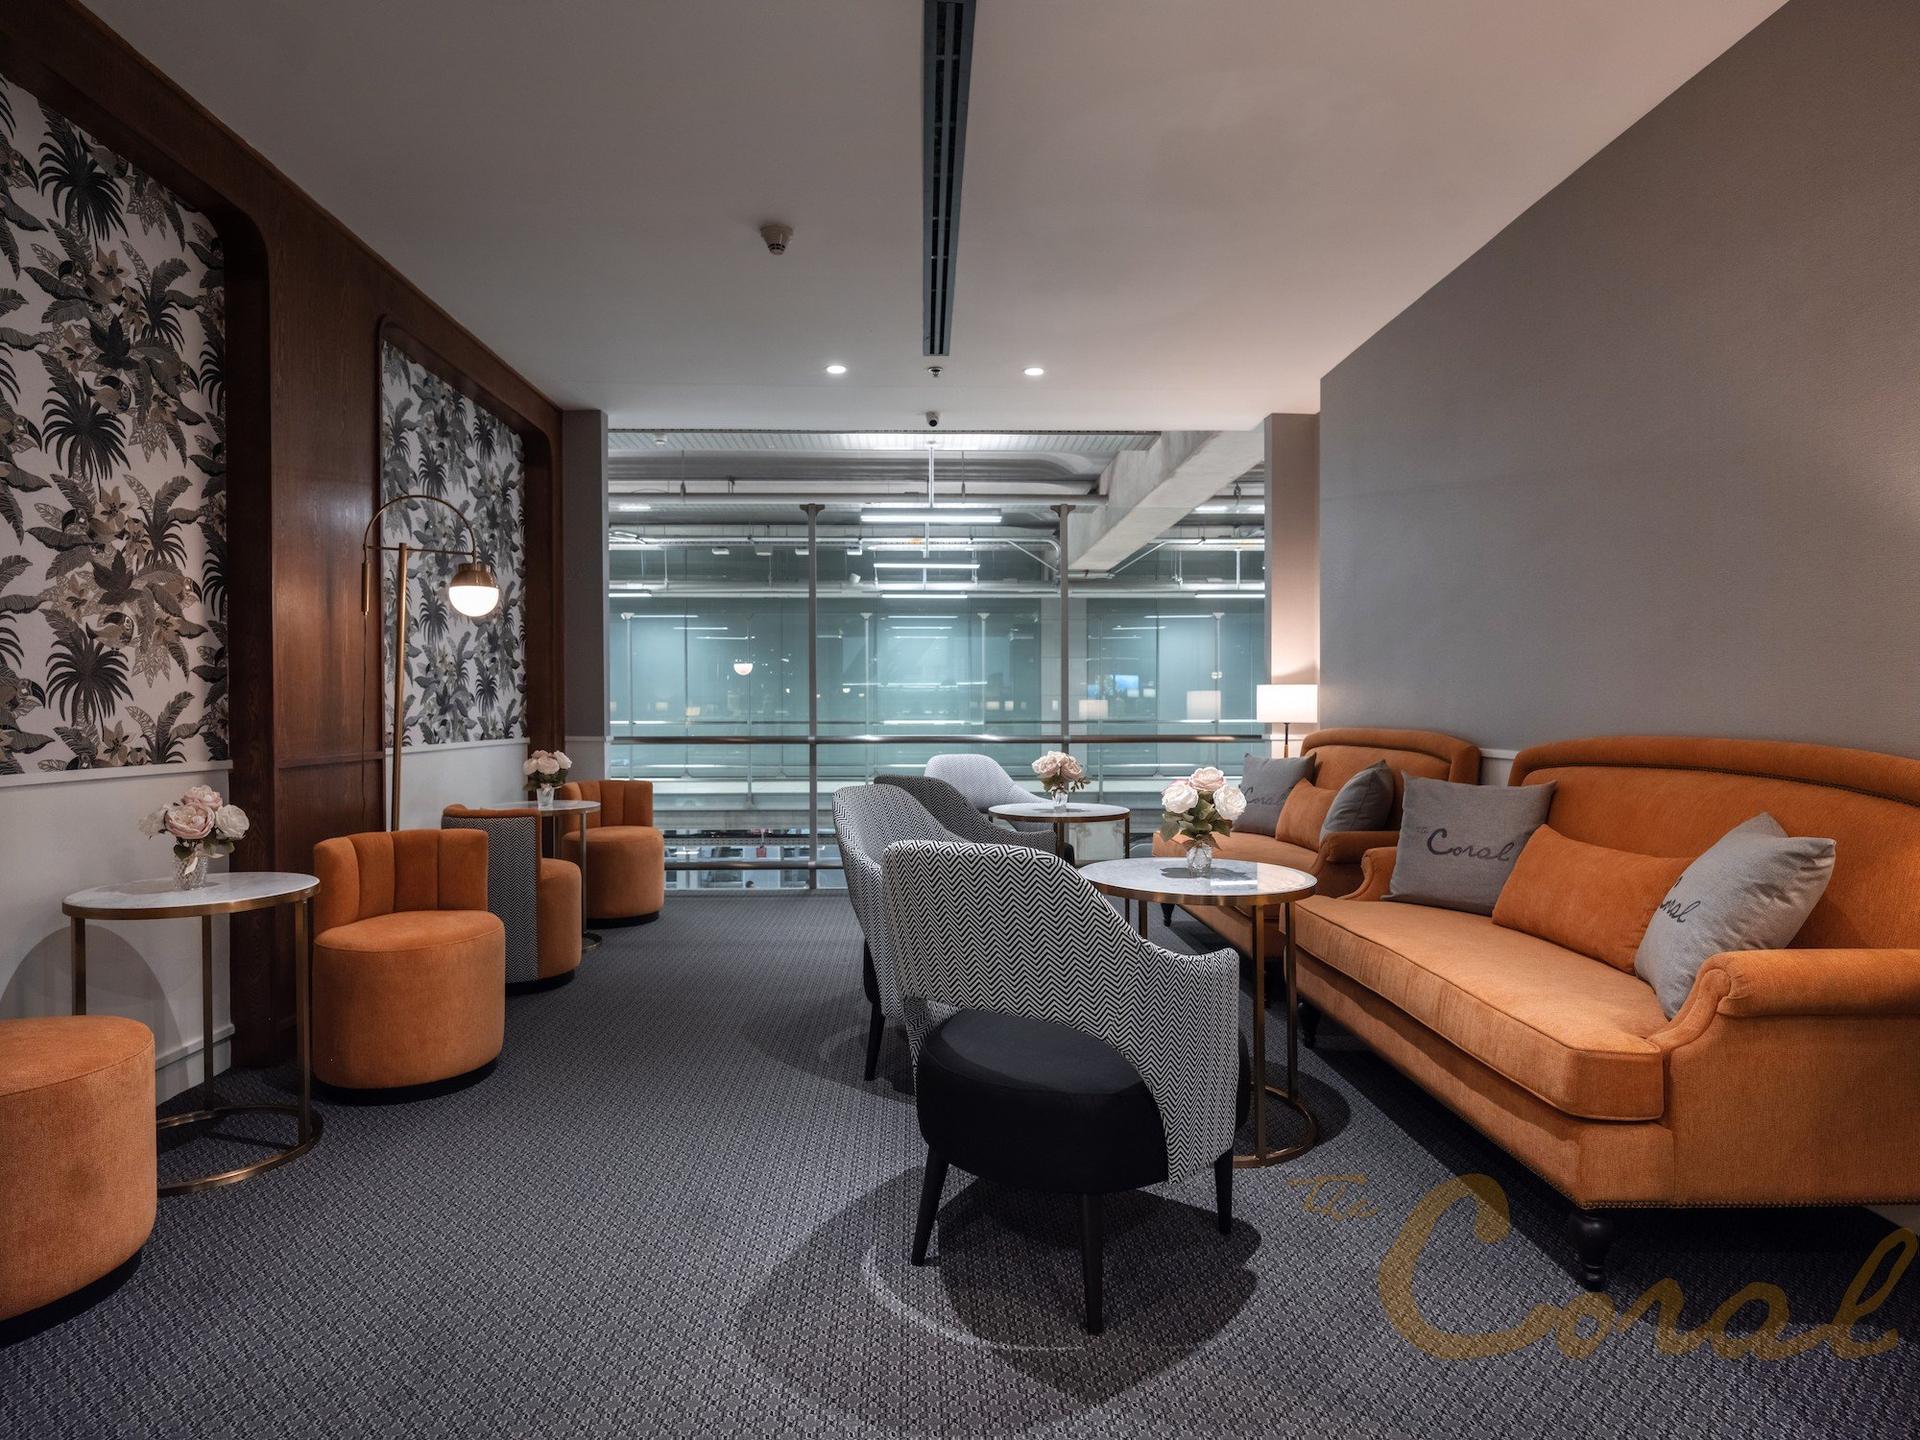 The Coral Finest Business Class Lounge image 1 of 15